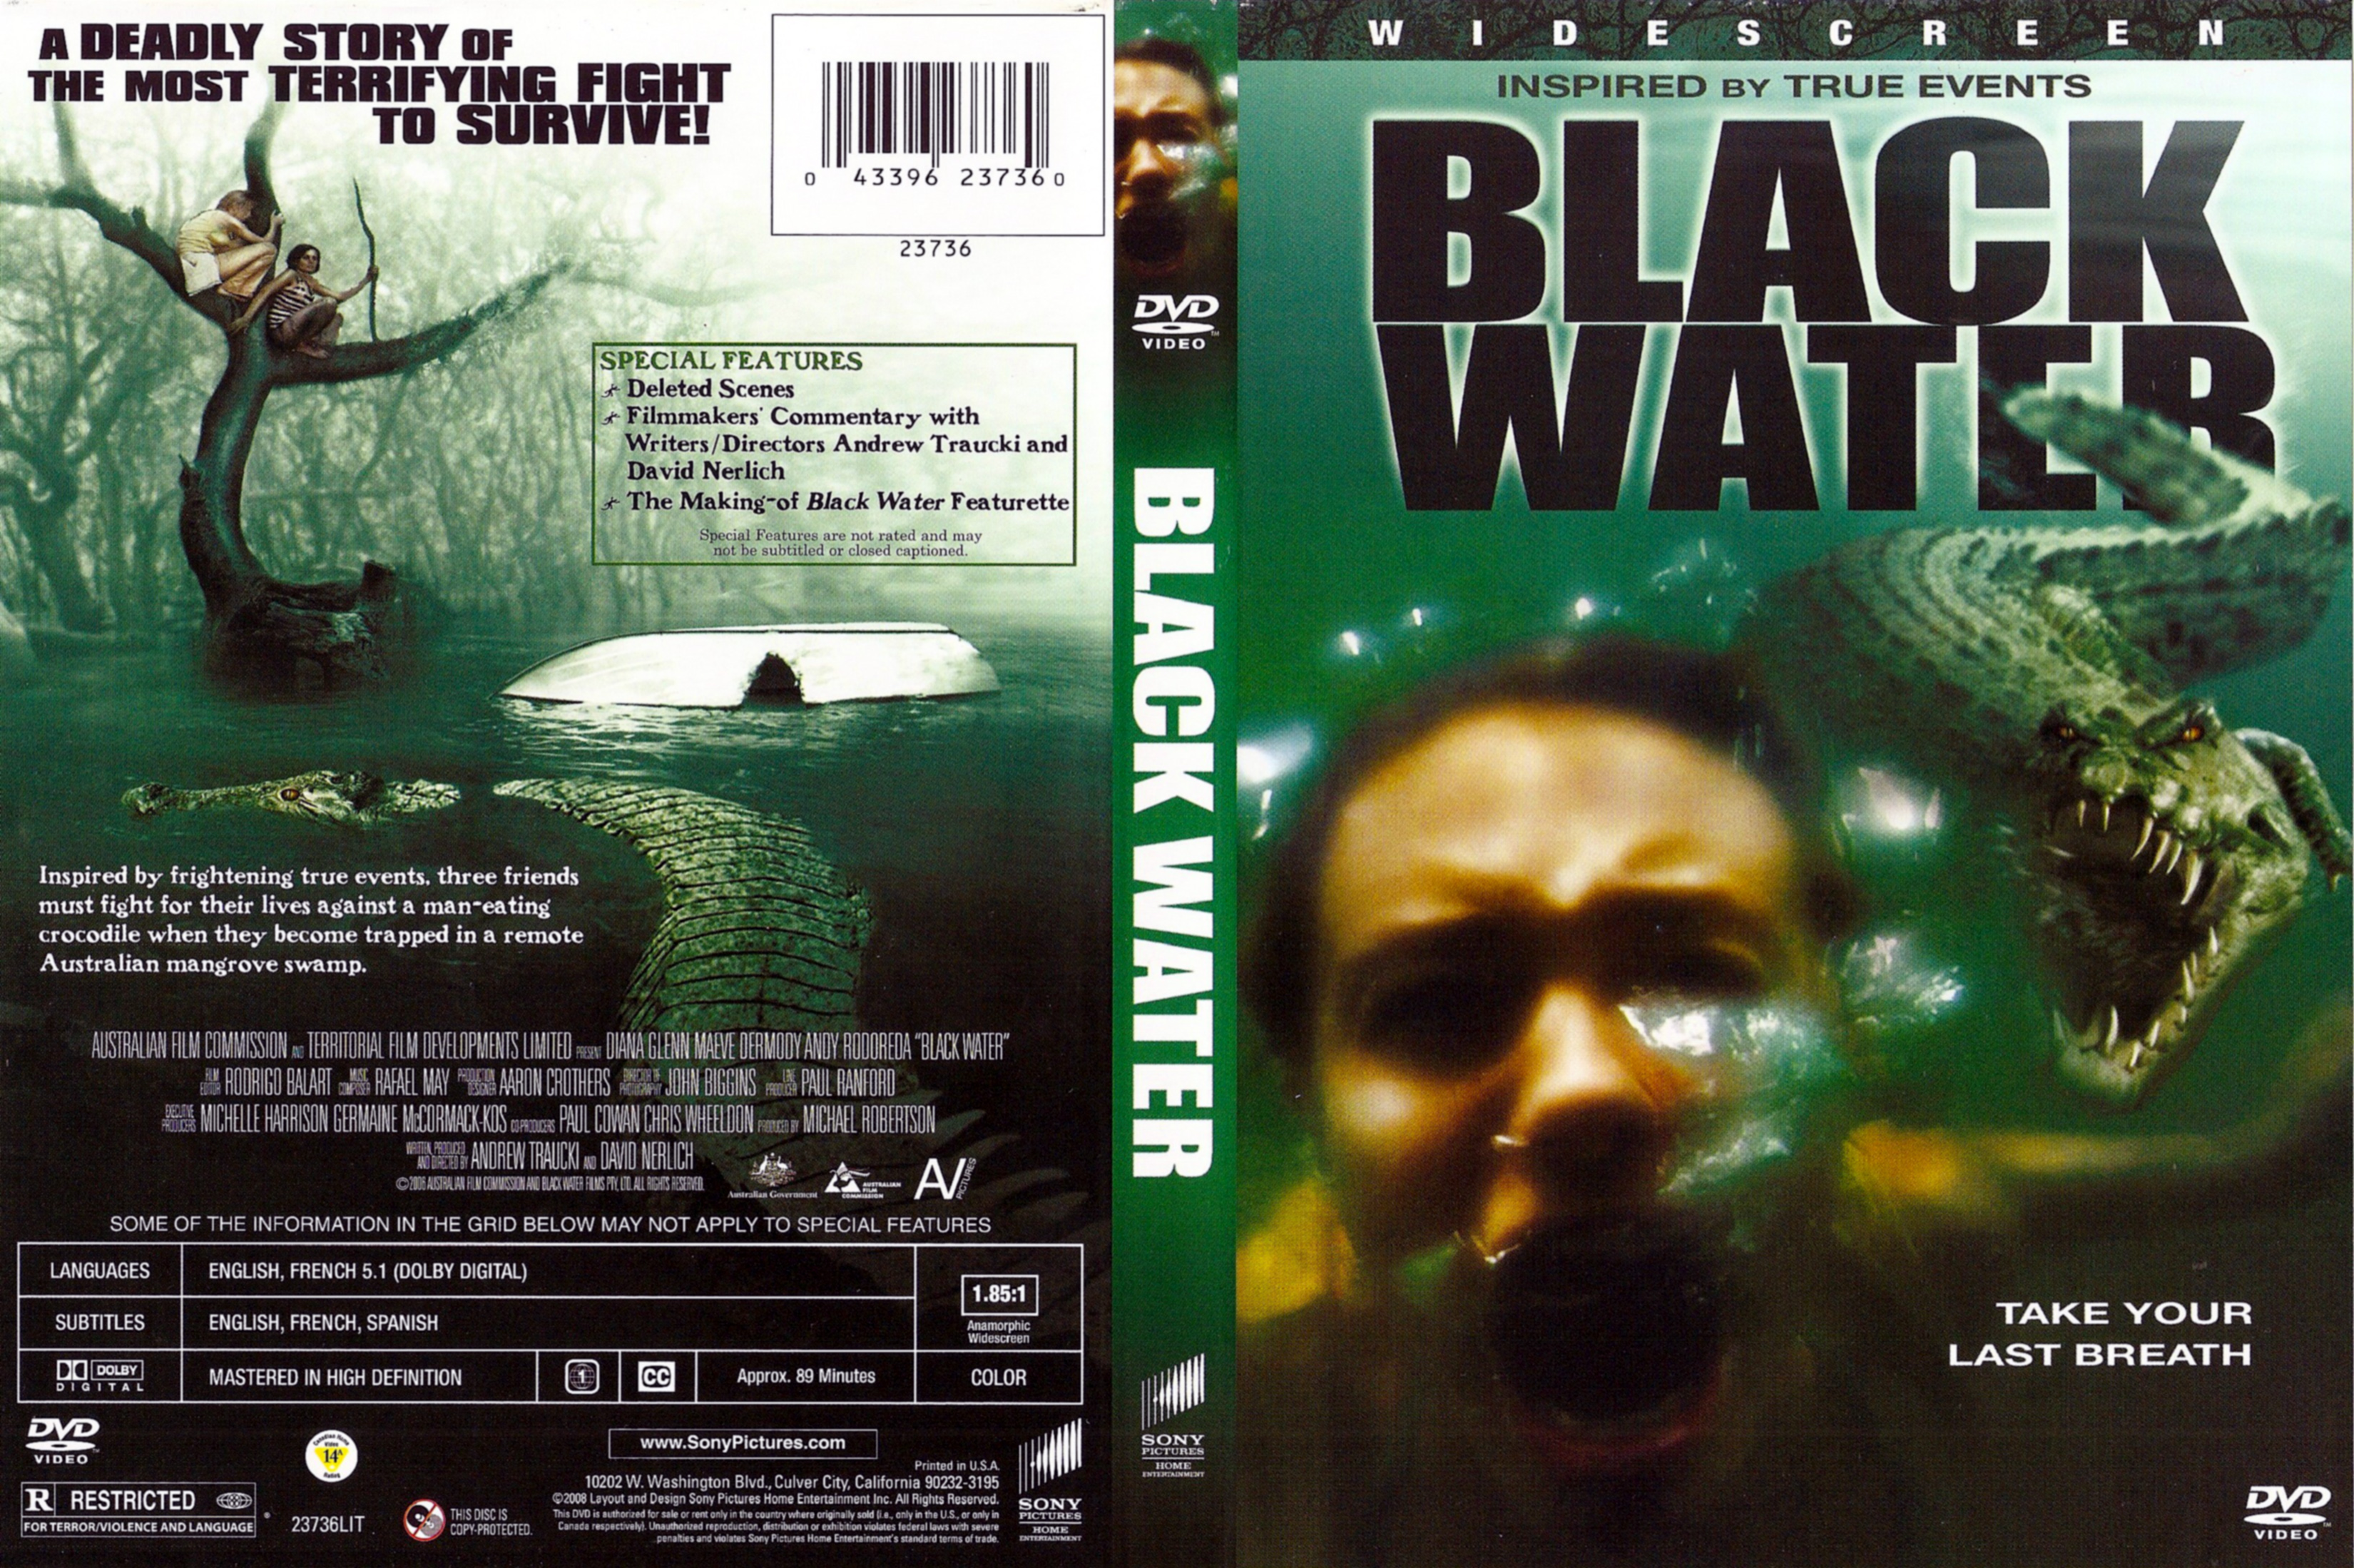 Jaquette DVD Black Water Zone 1